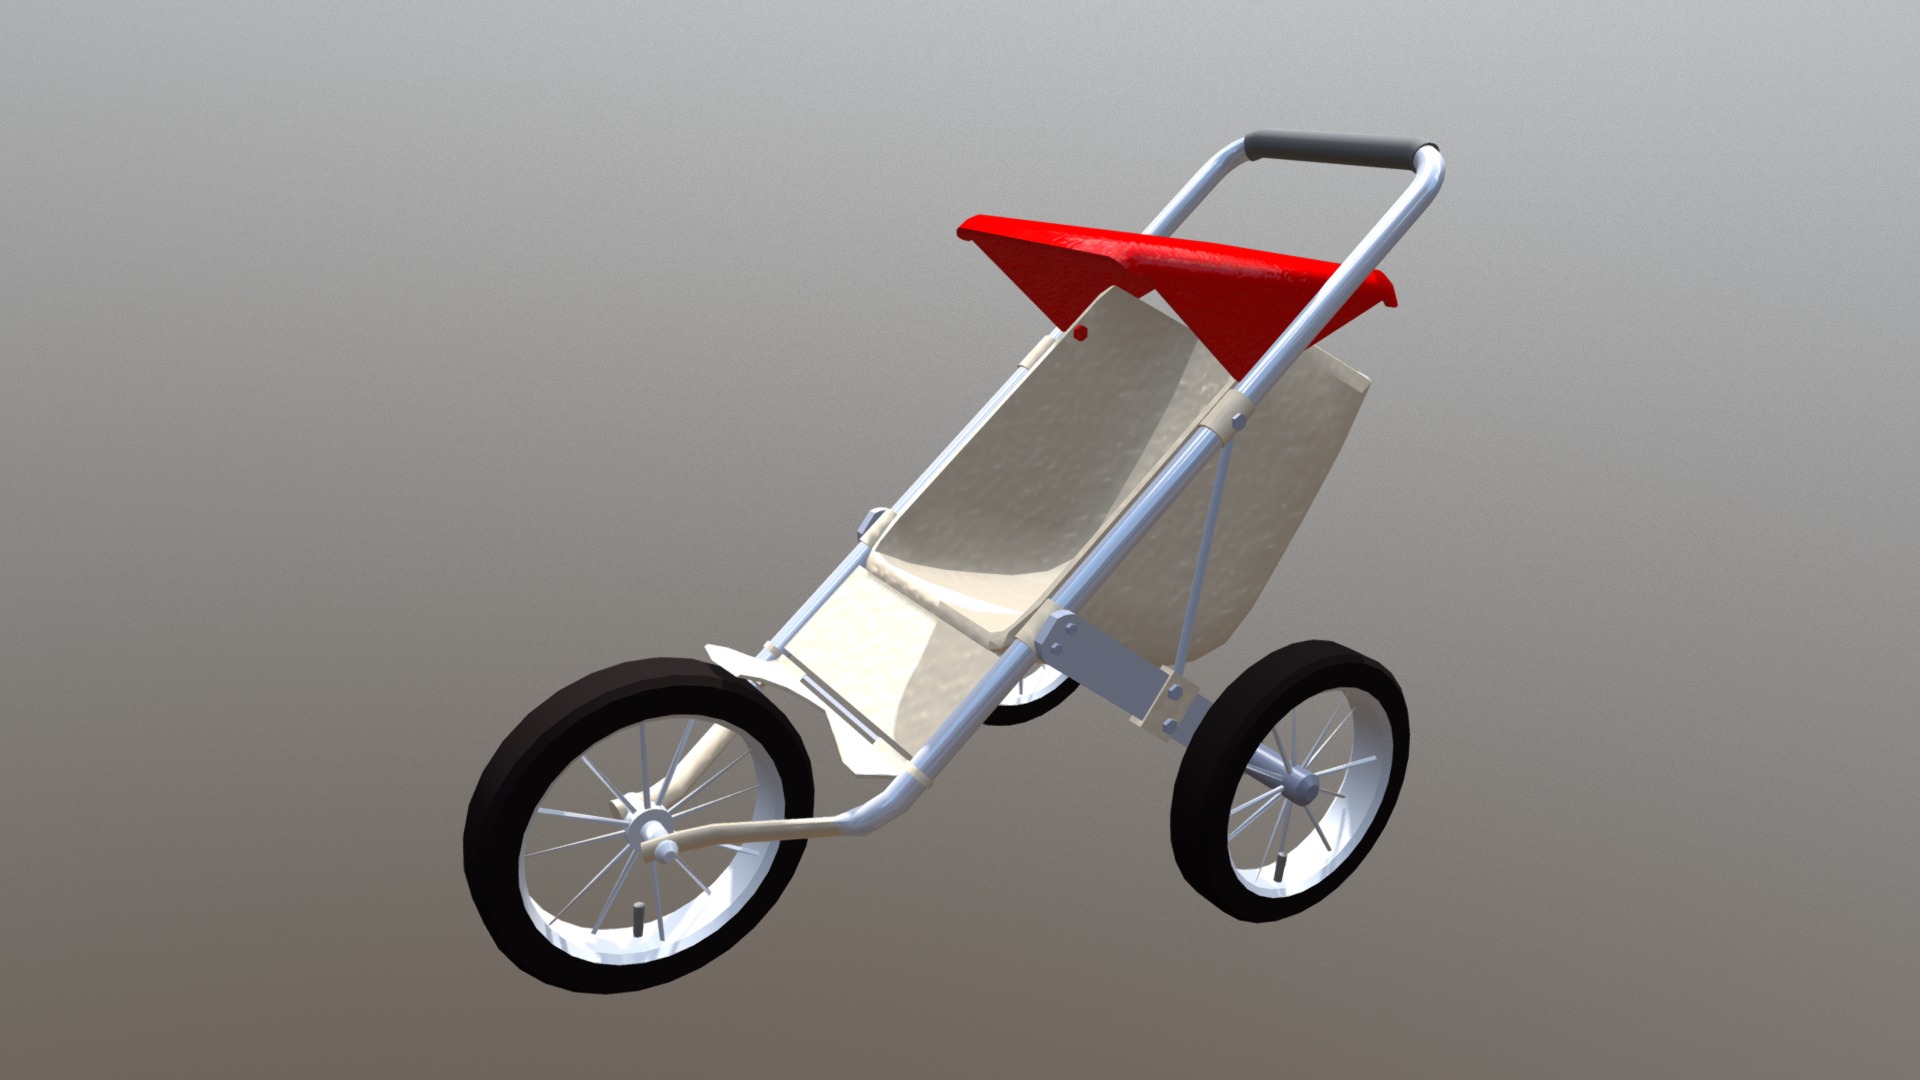 3D model Stroller 3-Wheeled - This is a 3D model of the Stroller 3-Wheeled. The 3D model is about a drone with a red and white handle.